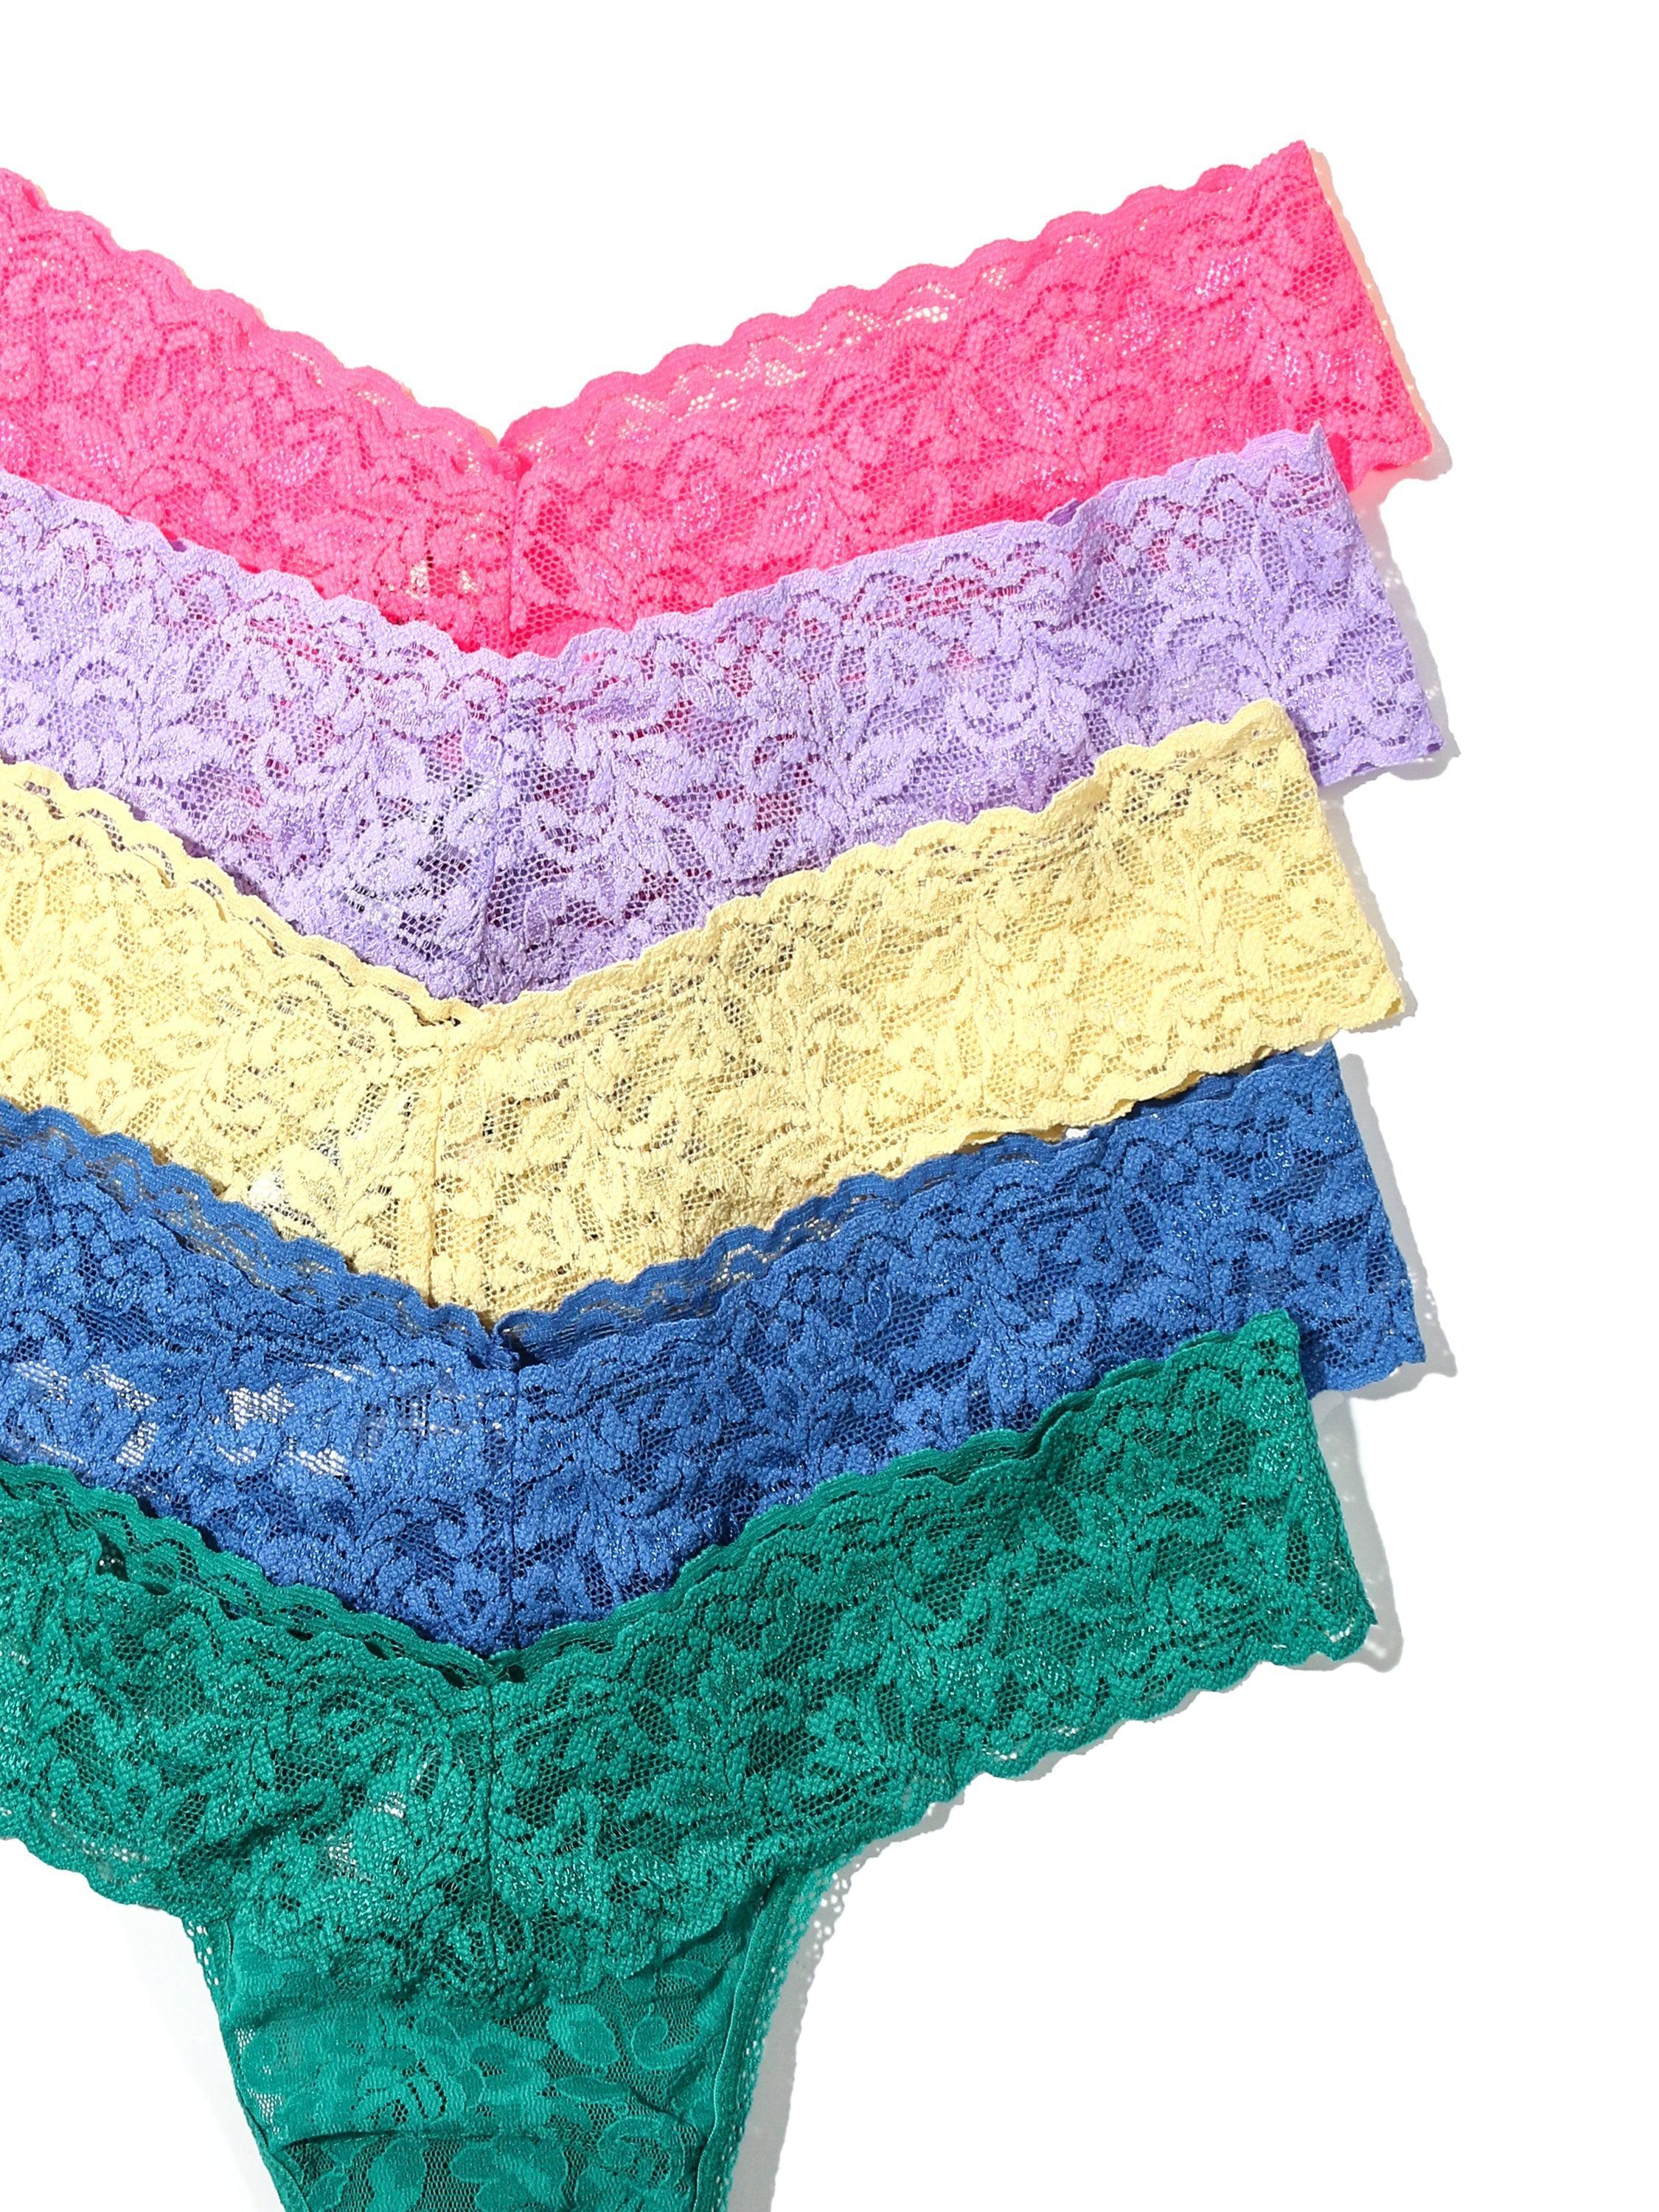 Pack of 2 lace thongs - Lace - Underwear - CLOTHING - Woman